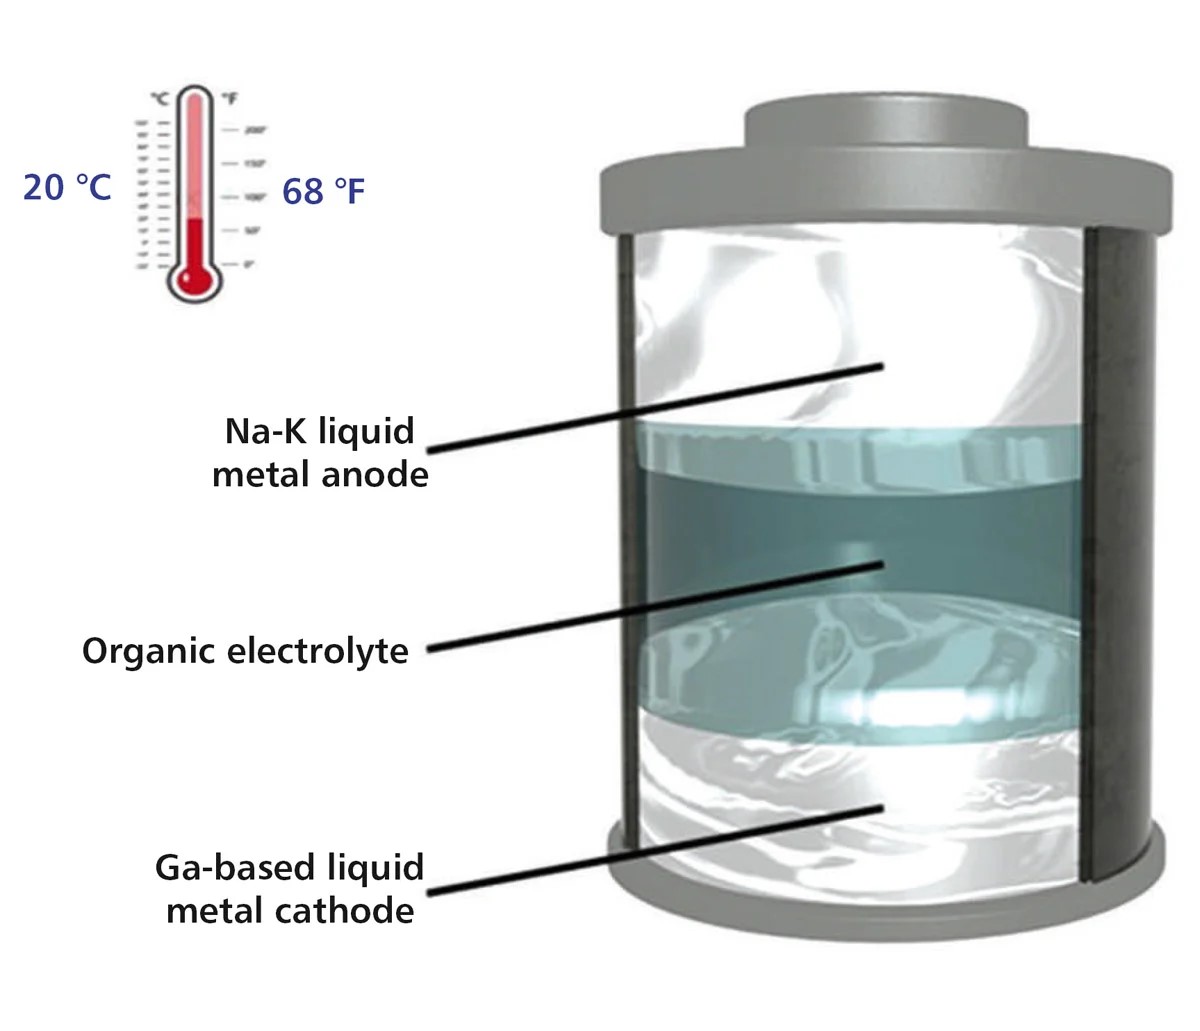 How do liquid metal batteries fit in EV and BESS designs?